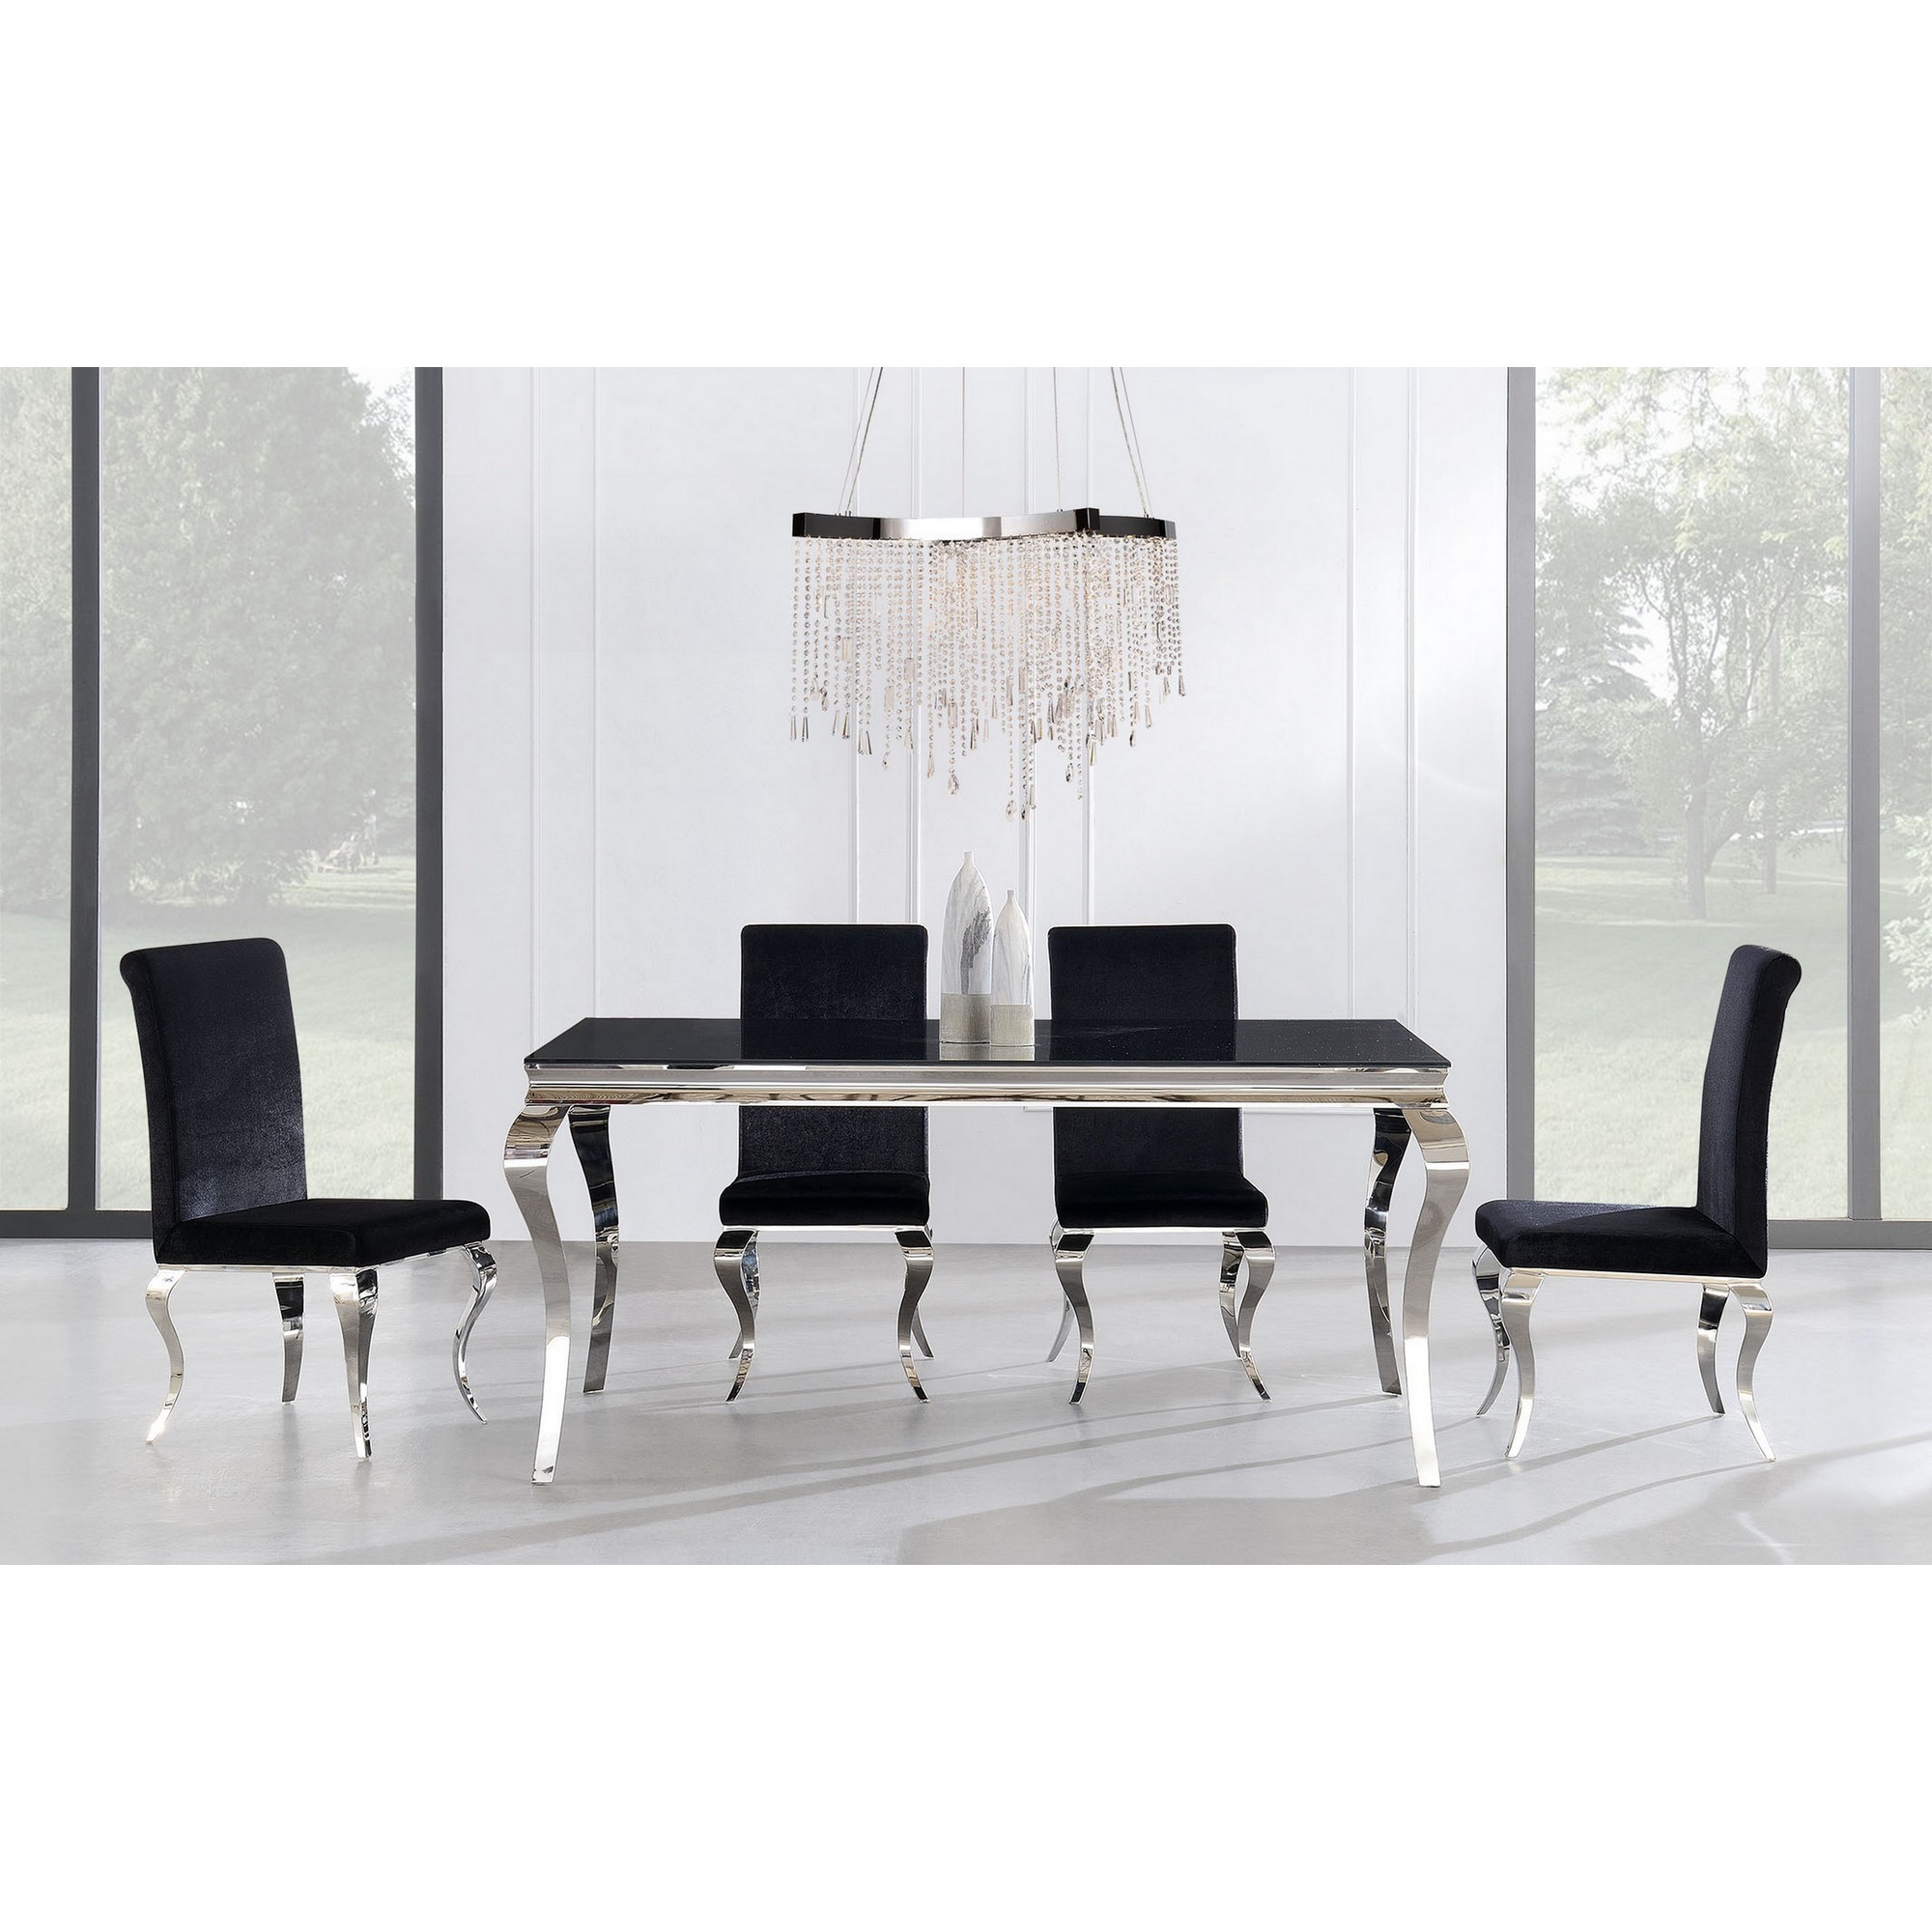 Stainless style steel legs Dining Table with Black Glass top